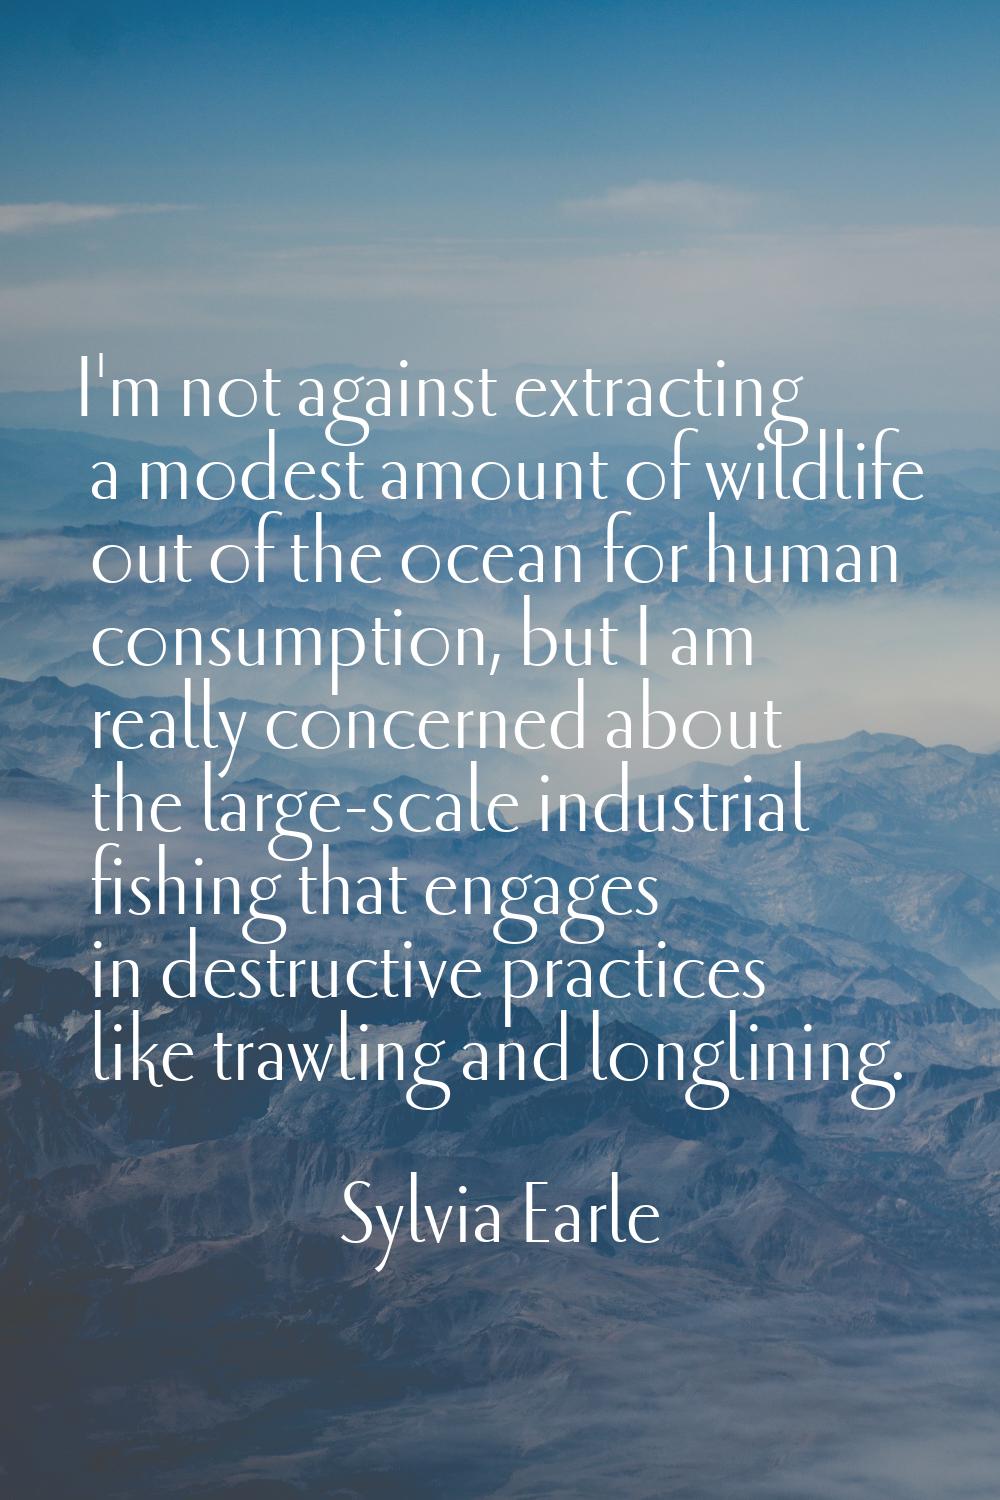 I'm not against extracting a modest amount of wildlife out of the ocean for human consumption, but 